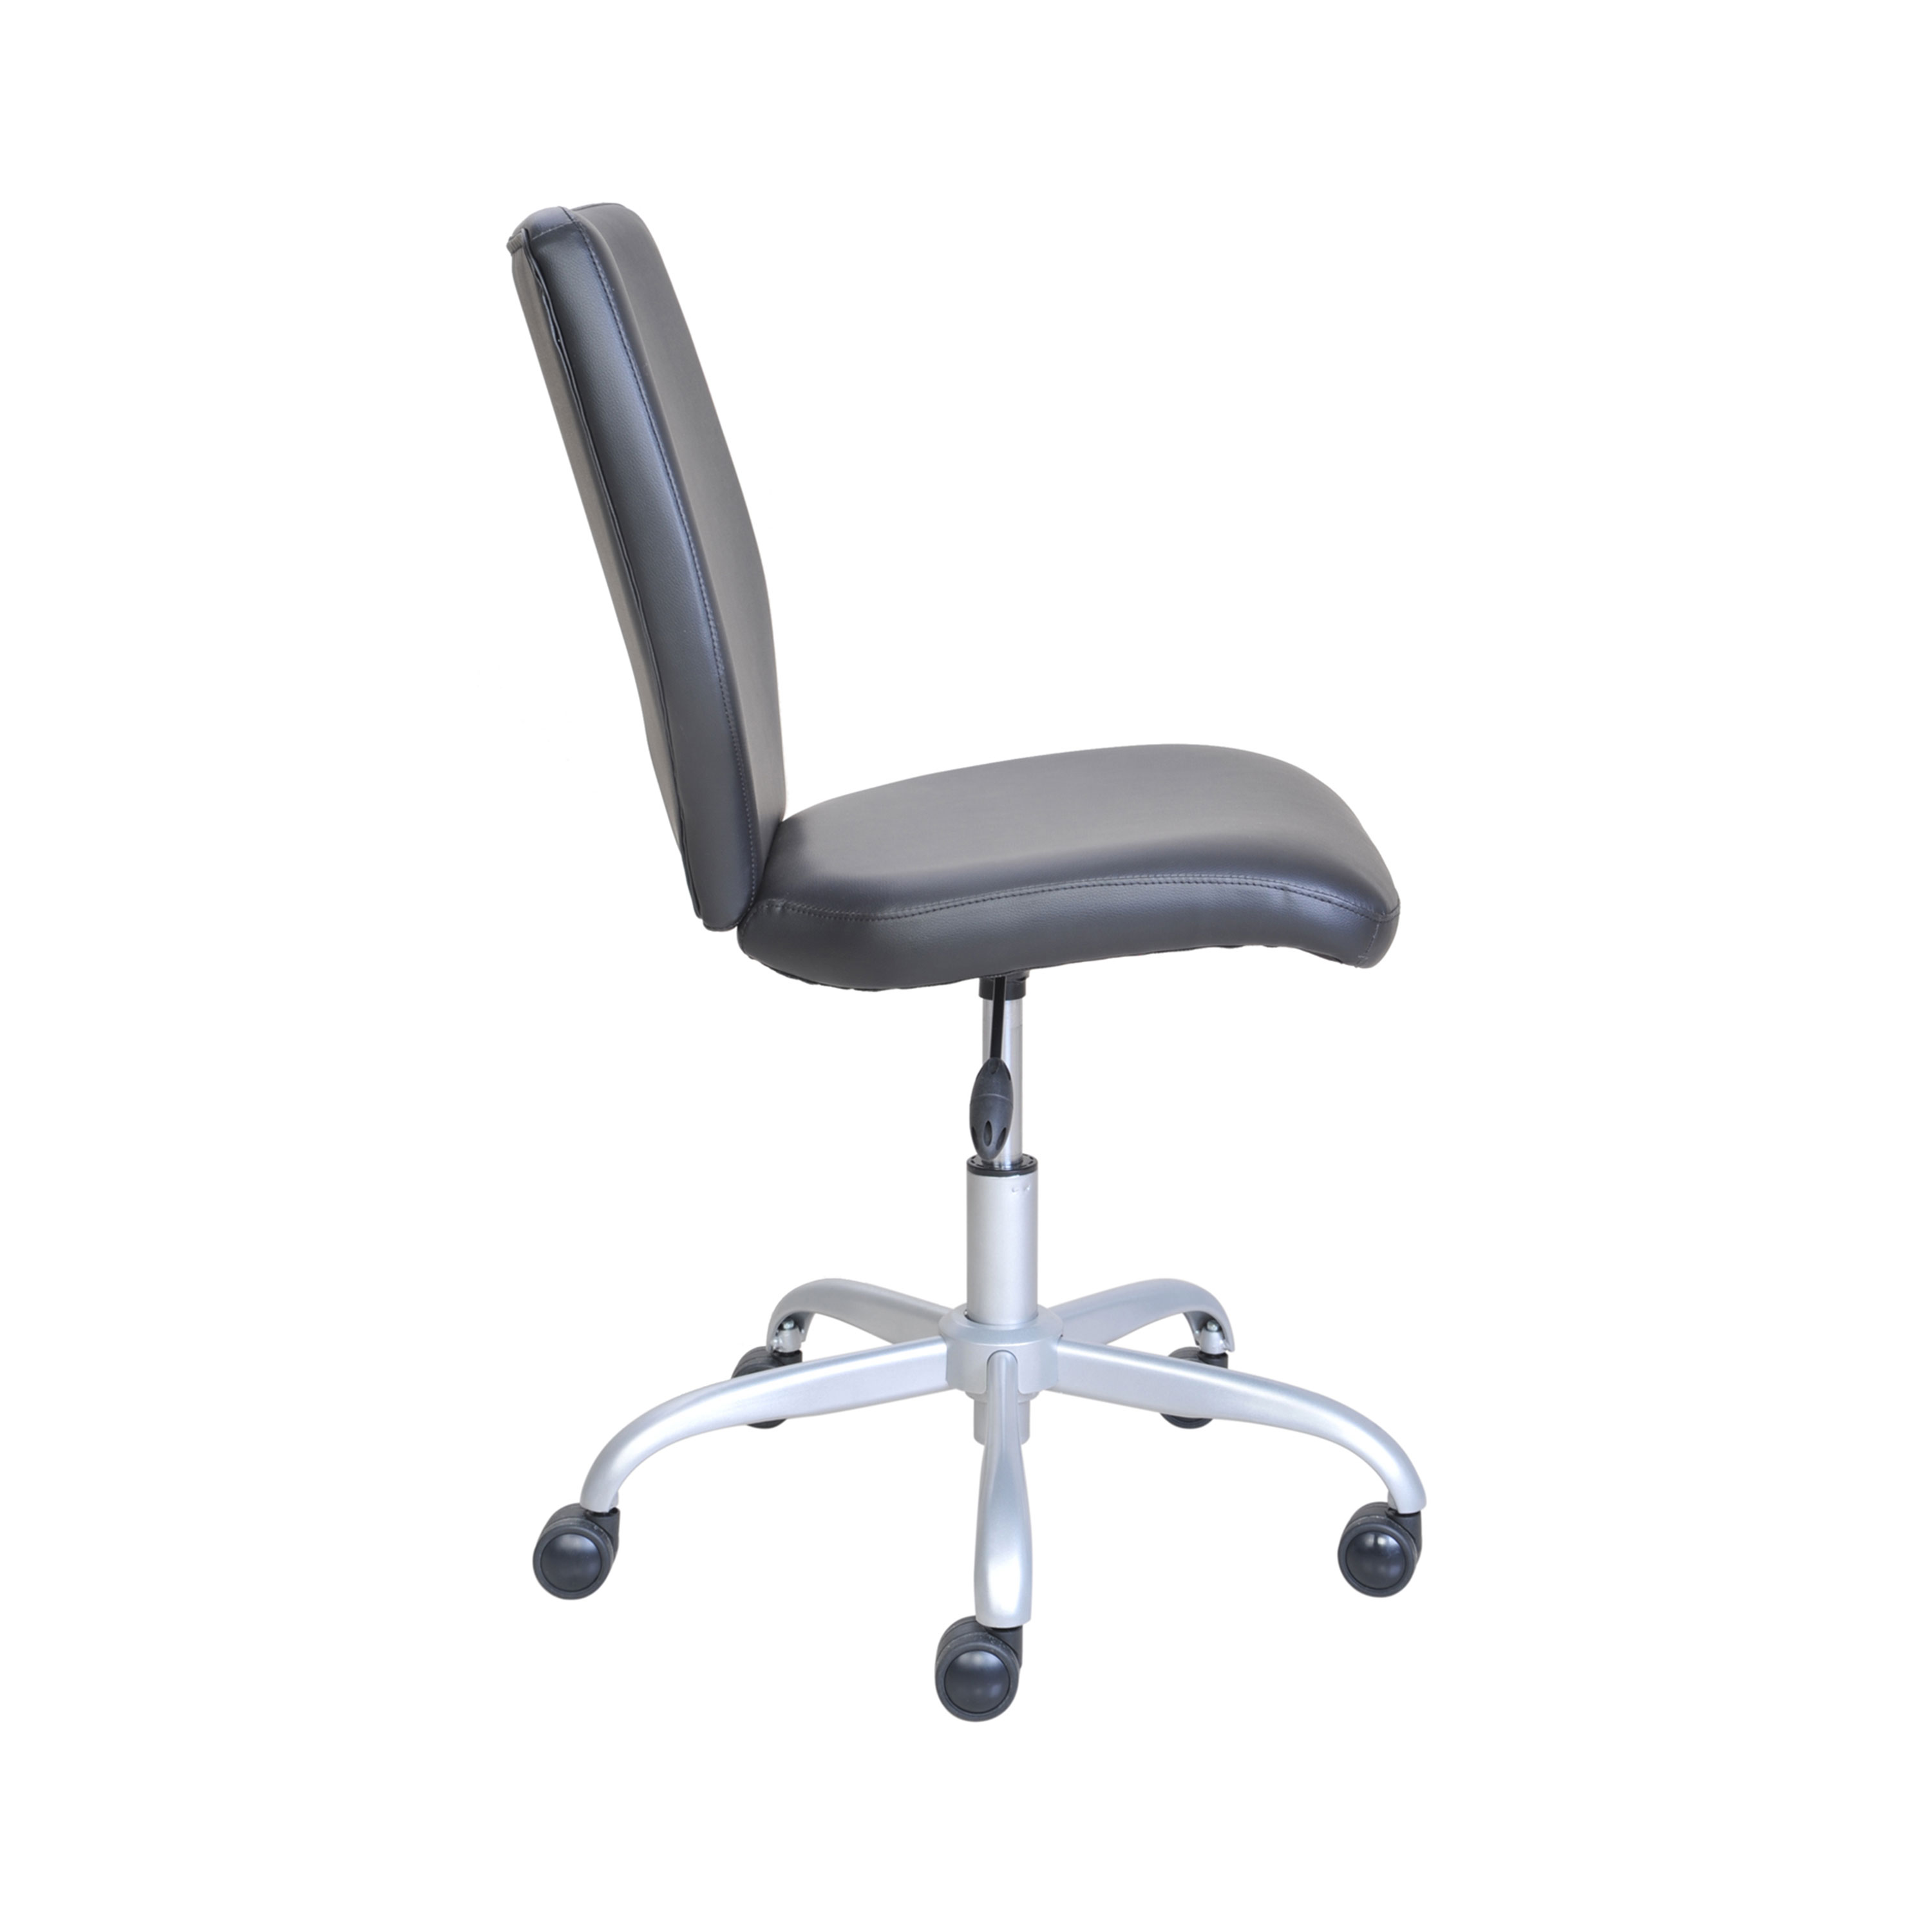 Mainstays Mid-Back Office Chair with Matching Color Casters, Gray Faux Leather - image 6 of 6